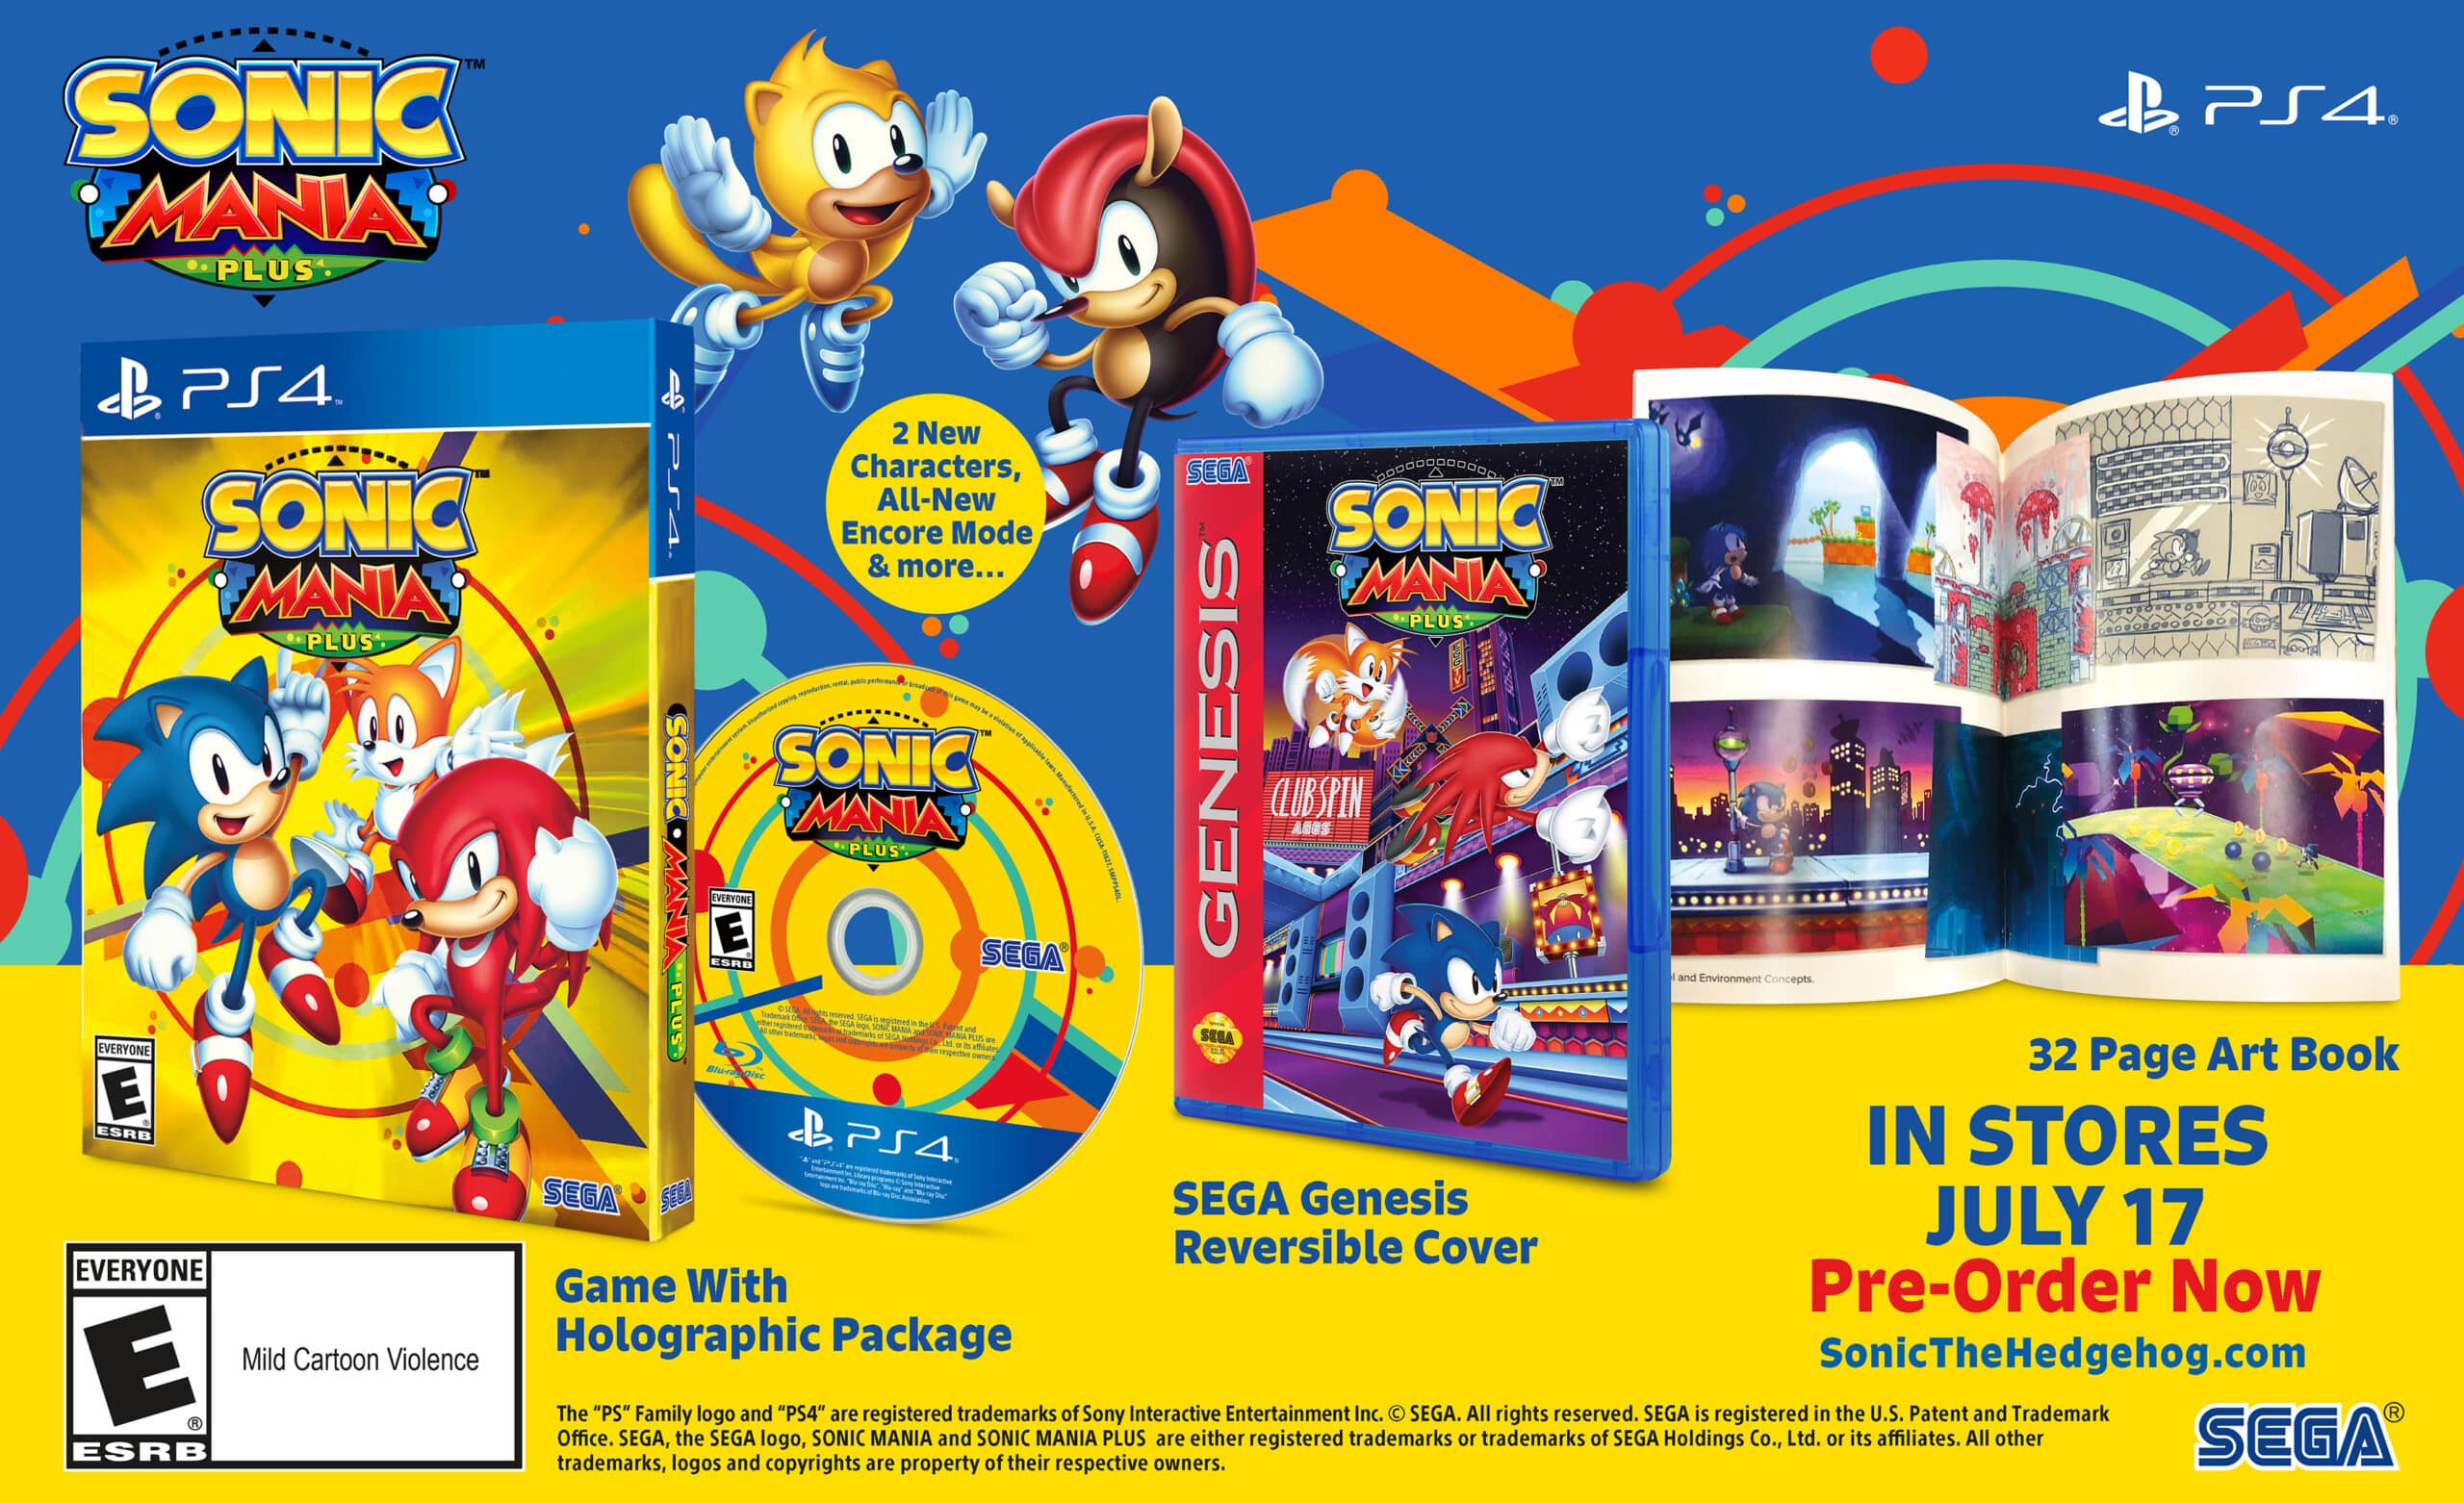 Sonic Mania Plus Physical Edition